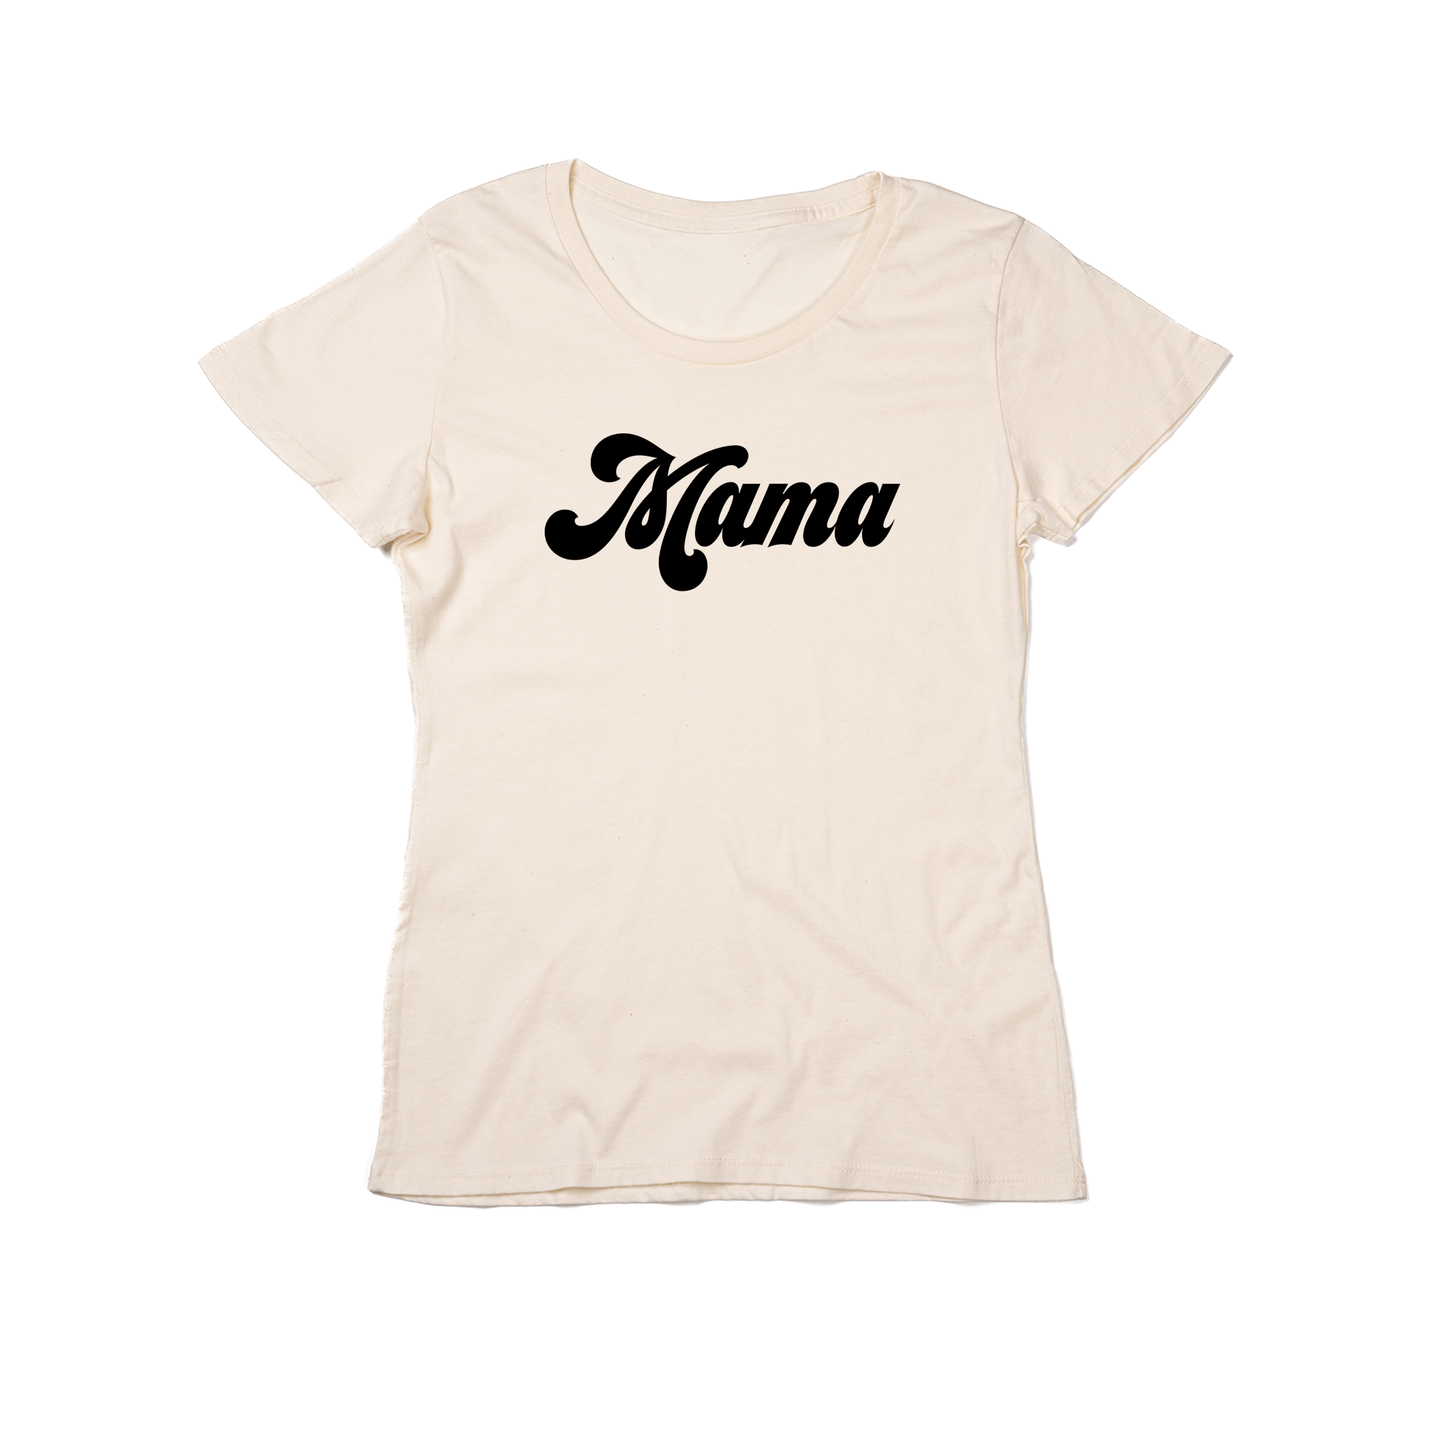 Mama (Retro, Black) - Women's Fitted Tee (Natural)